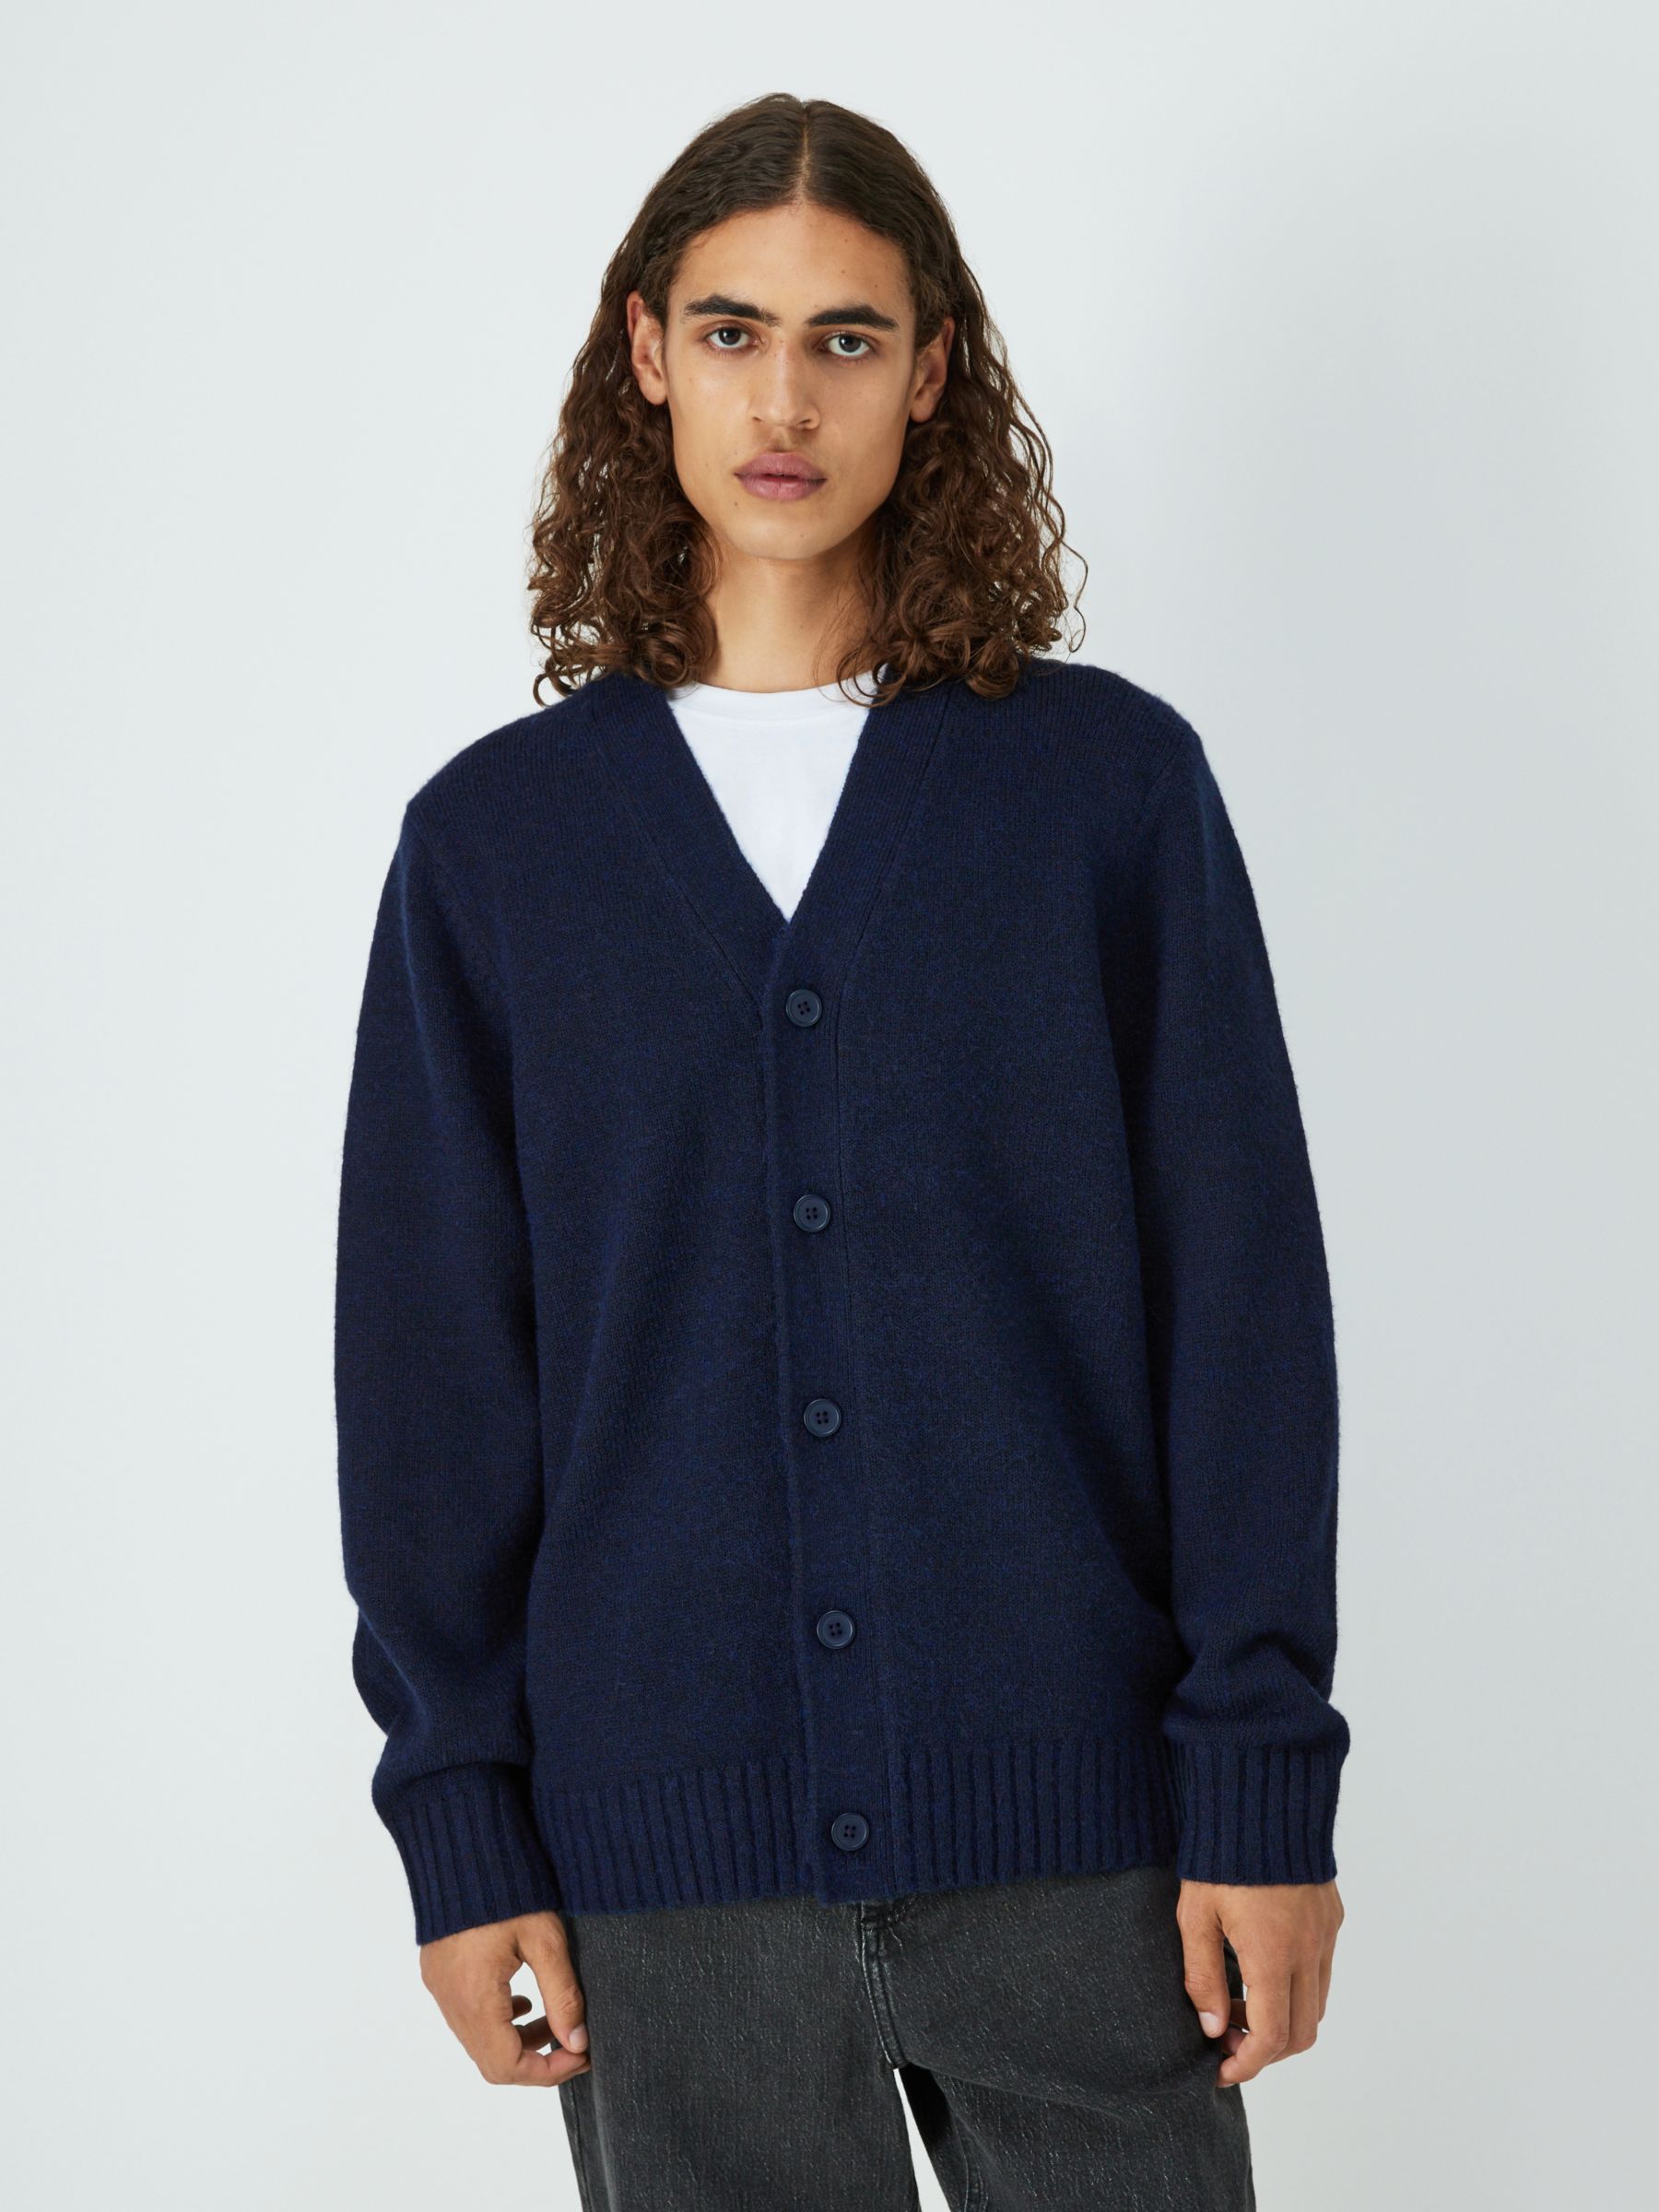 John Lewis ANYDAY Recycled Wool Blend Cardigan